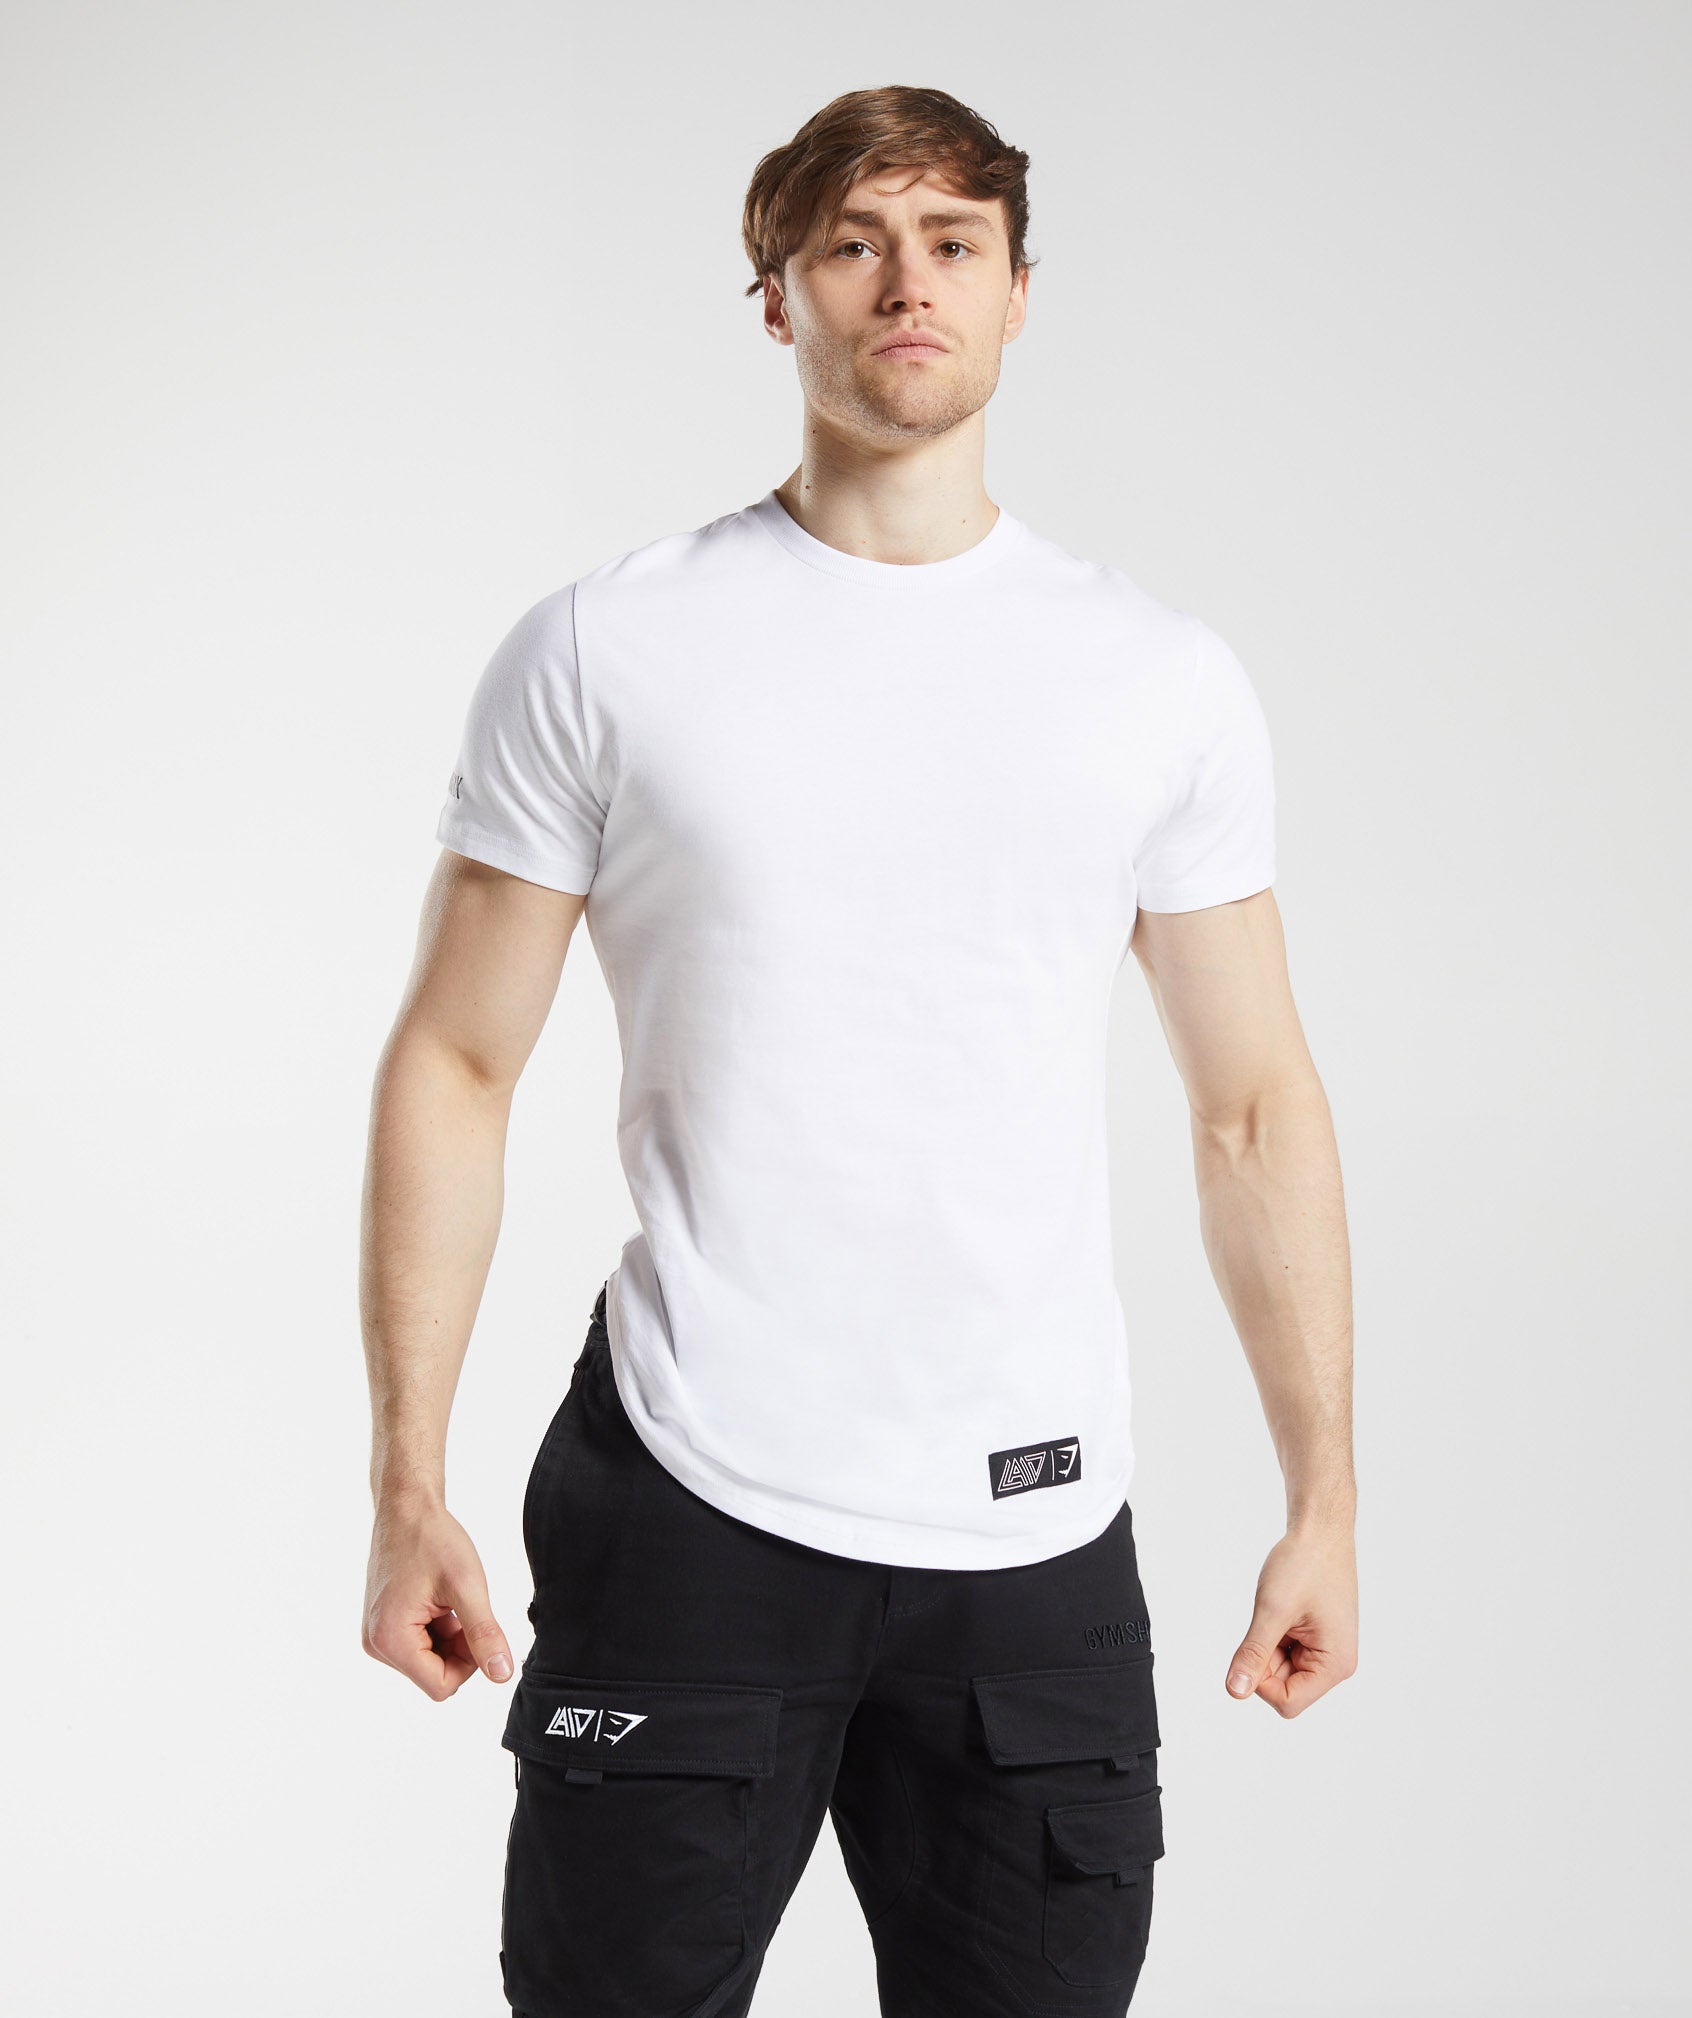 The David Laid x Gymshark Collection – Gymshark